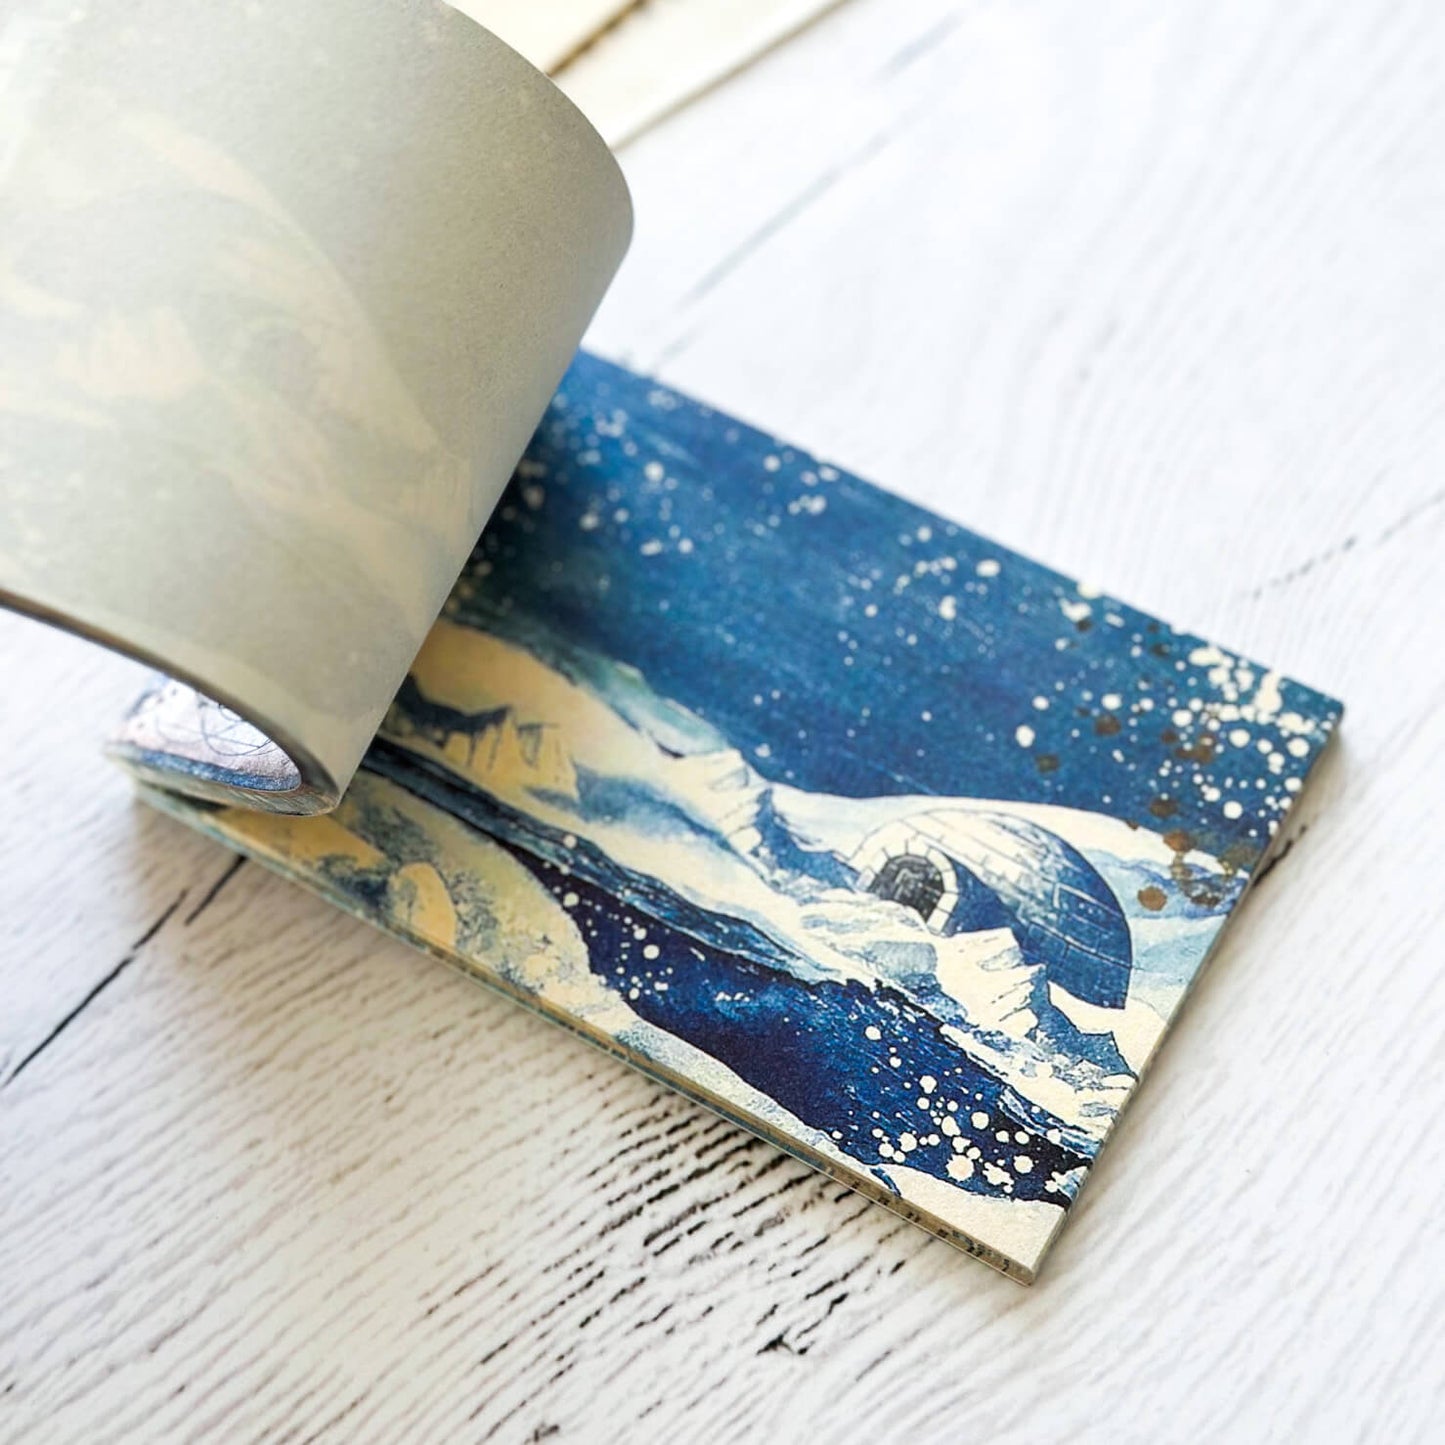 Decorative paper that has a North pole scene with iglo and icebergs.